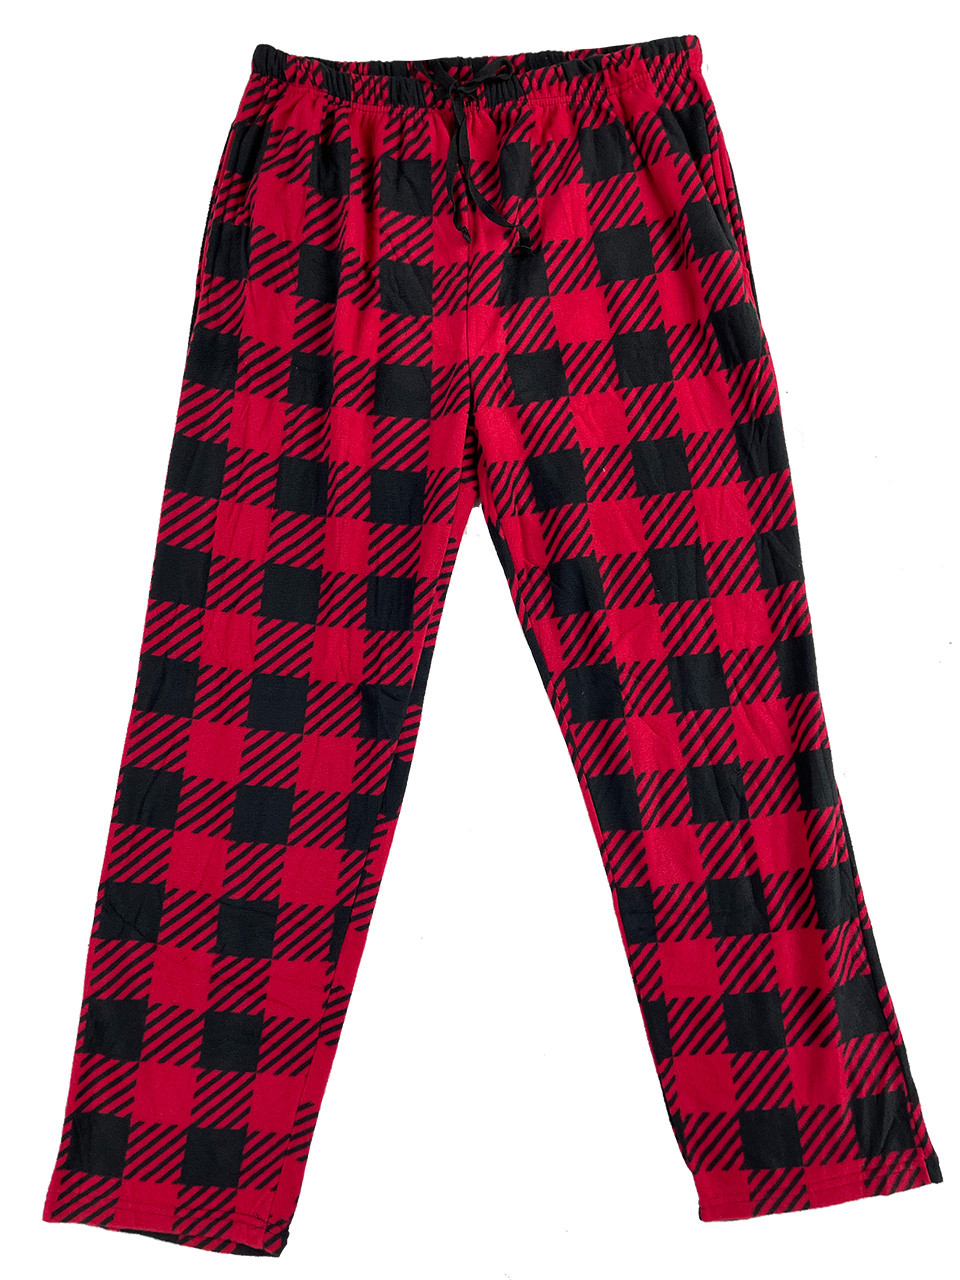 Men's Plush Sleep Pants: Red Buffalo Plaid Pants, Relaxed Fit, Sizes up ...